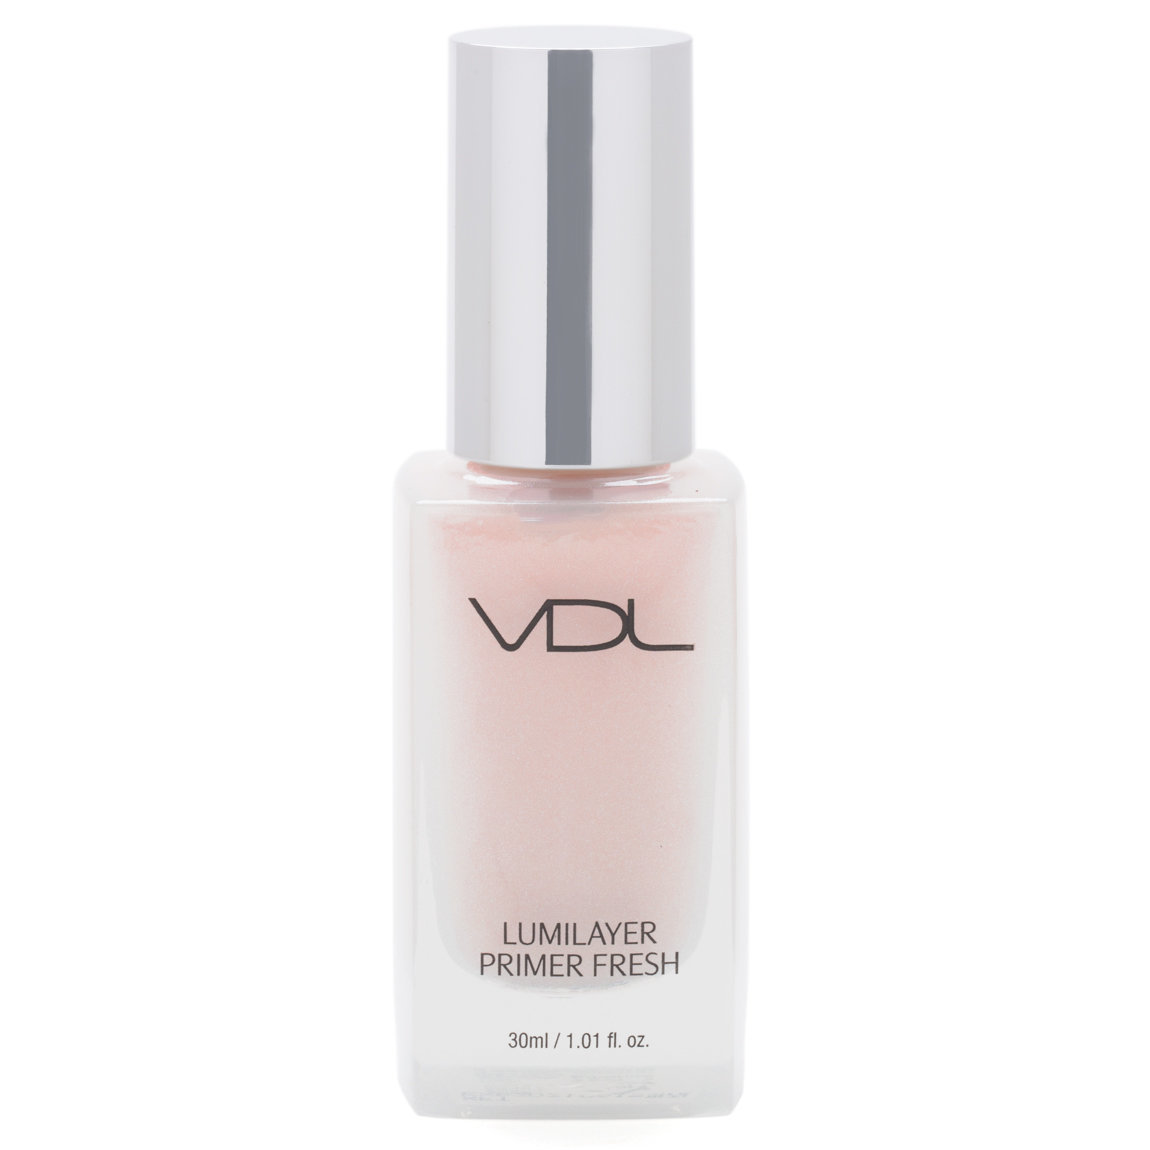 VDL Lumilayer Primer Fresh alternative view 1 - product swatch.